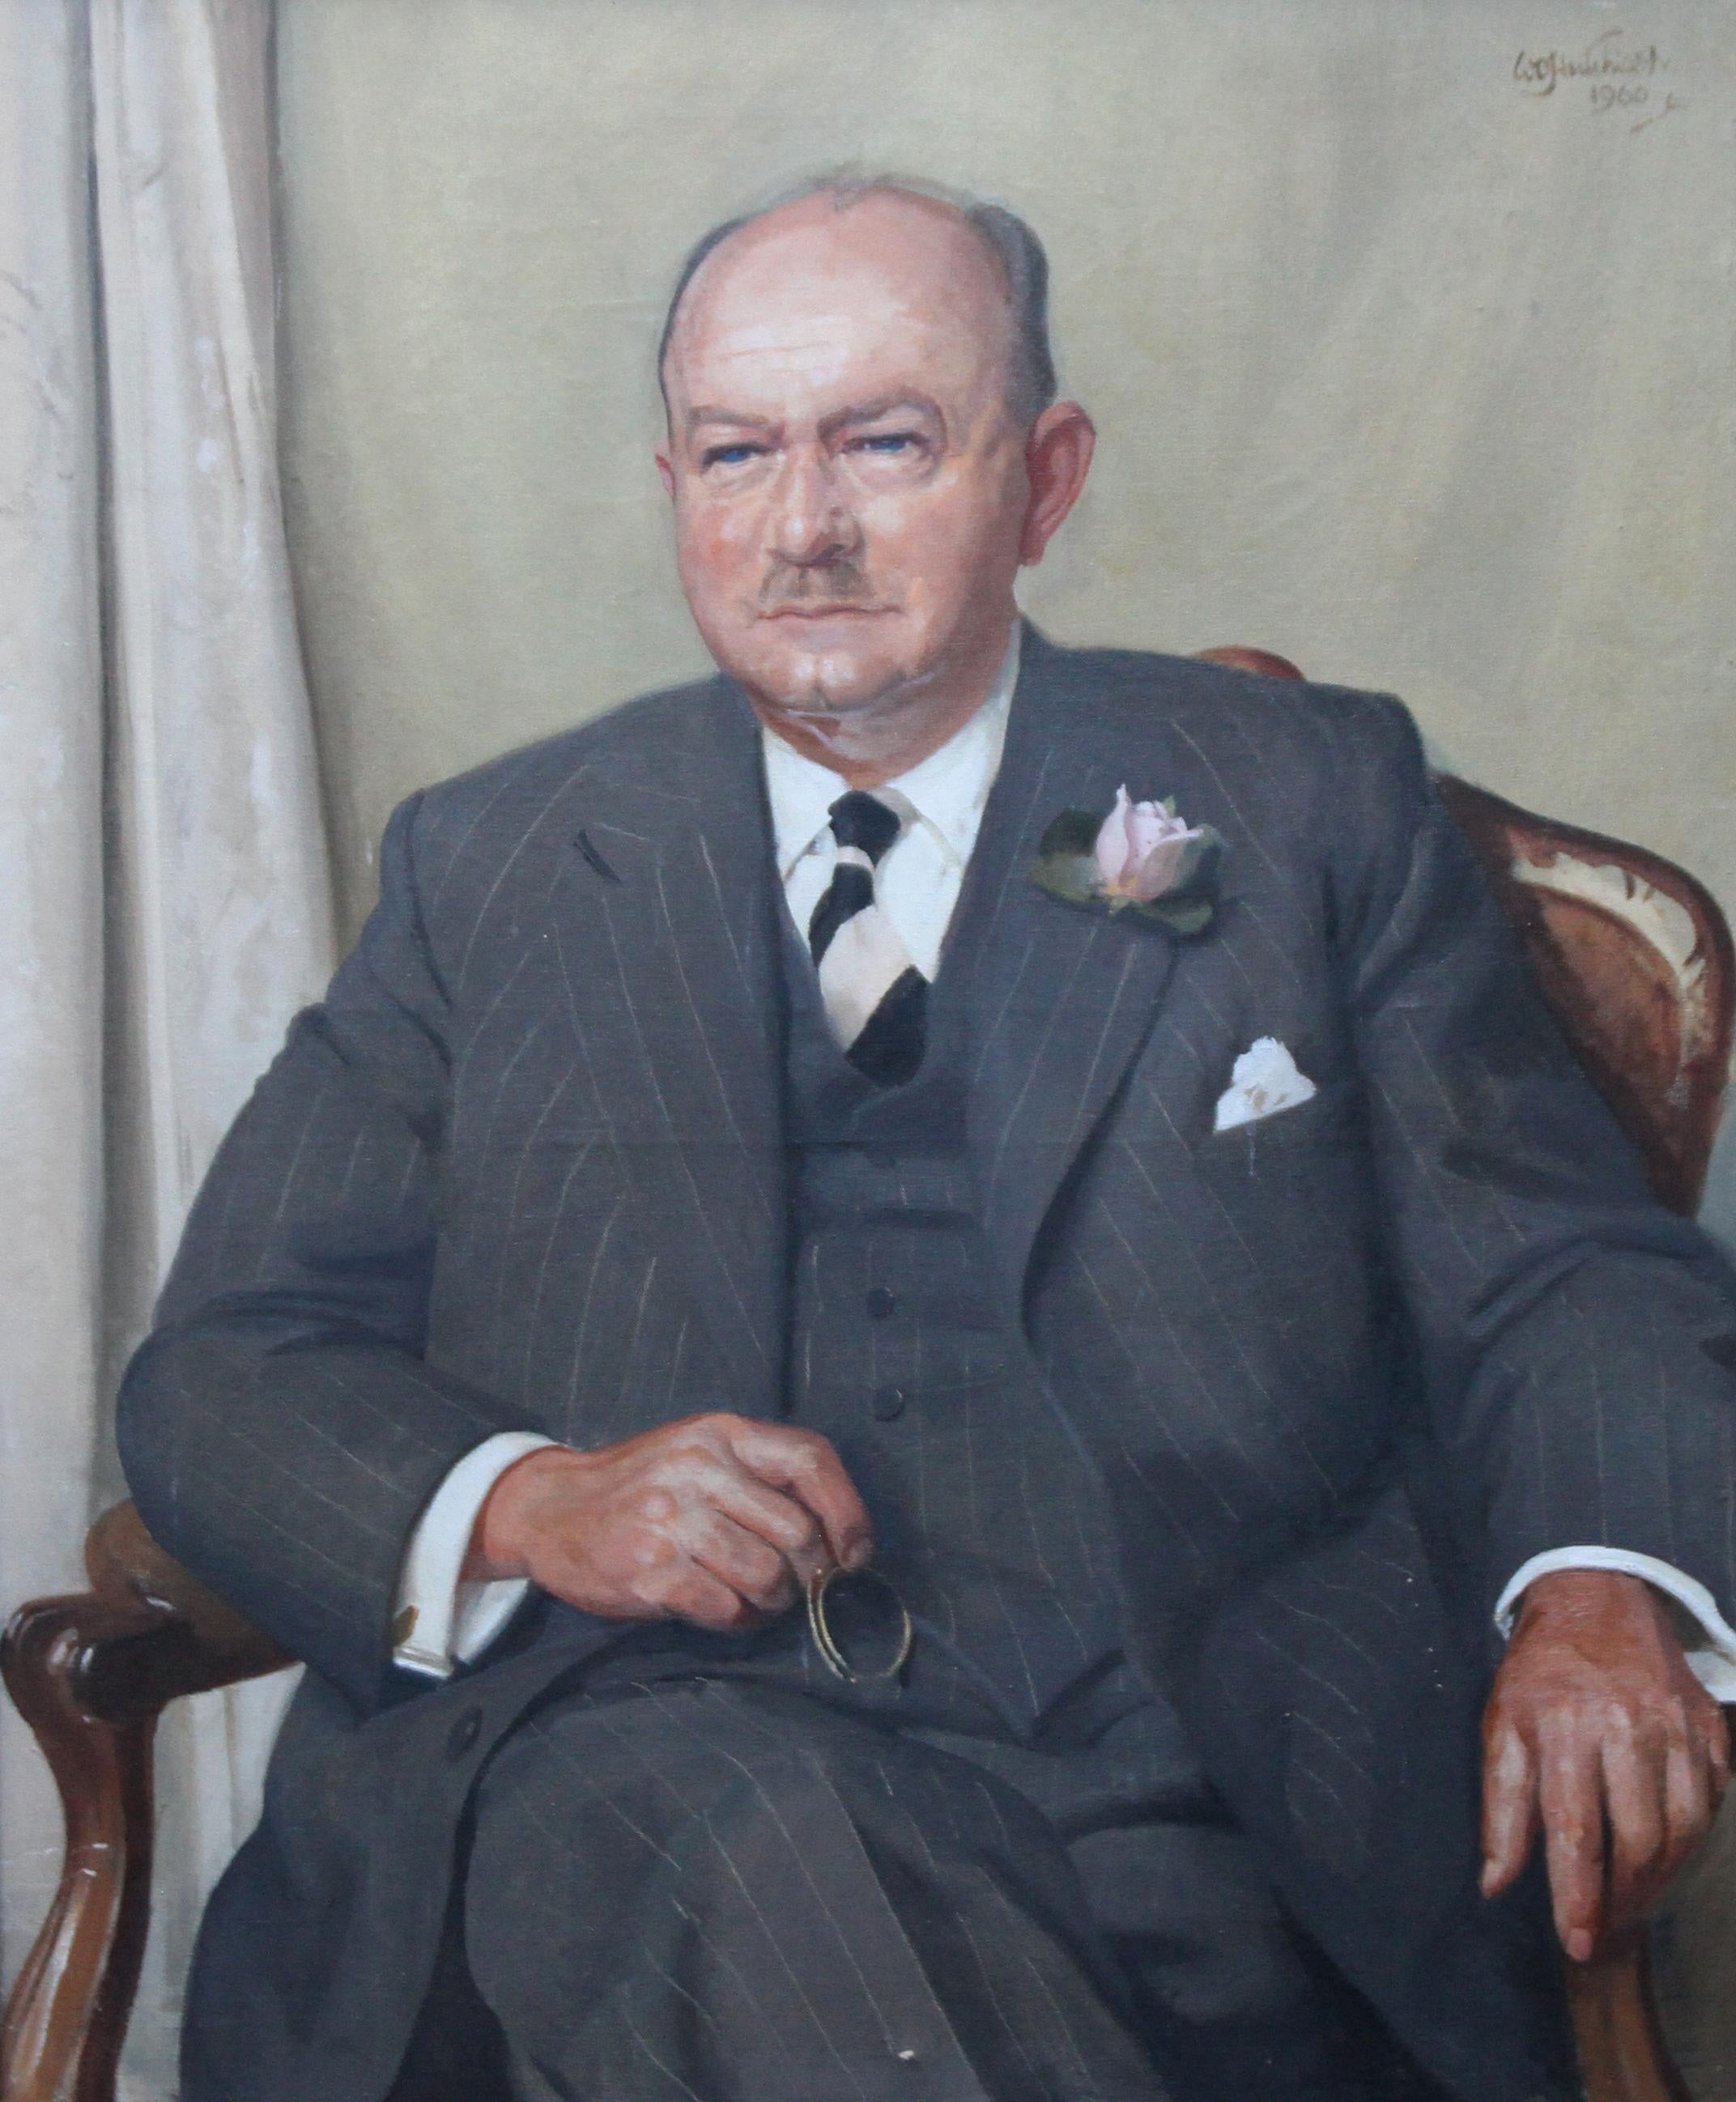 An original large Scottish portrait oil by noted Scottish artist William Oliphant Hutchinson. The work is a portrait of a gentleman, in a suit,  with a rose in his lapel. This painting is a fine realist portrait. It dates to 1960 when he was at the